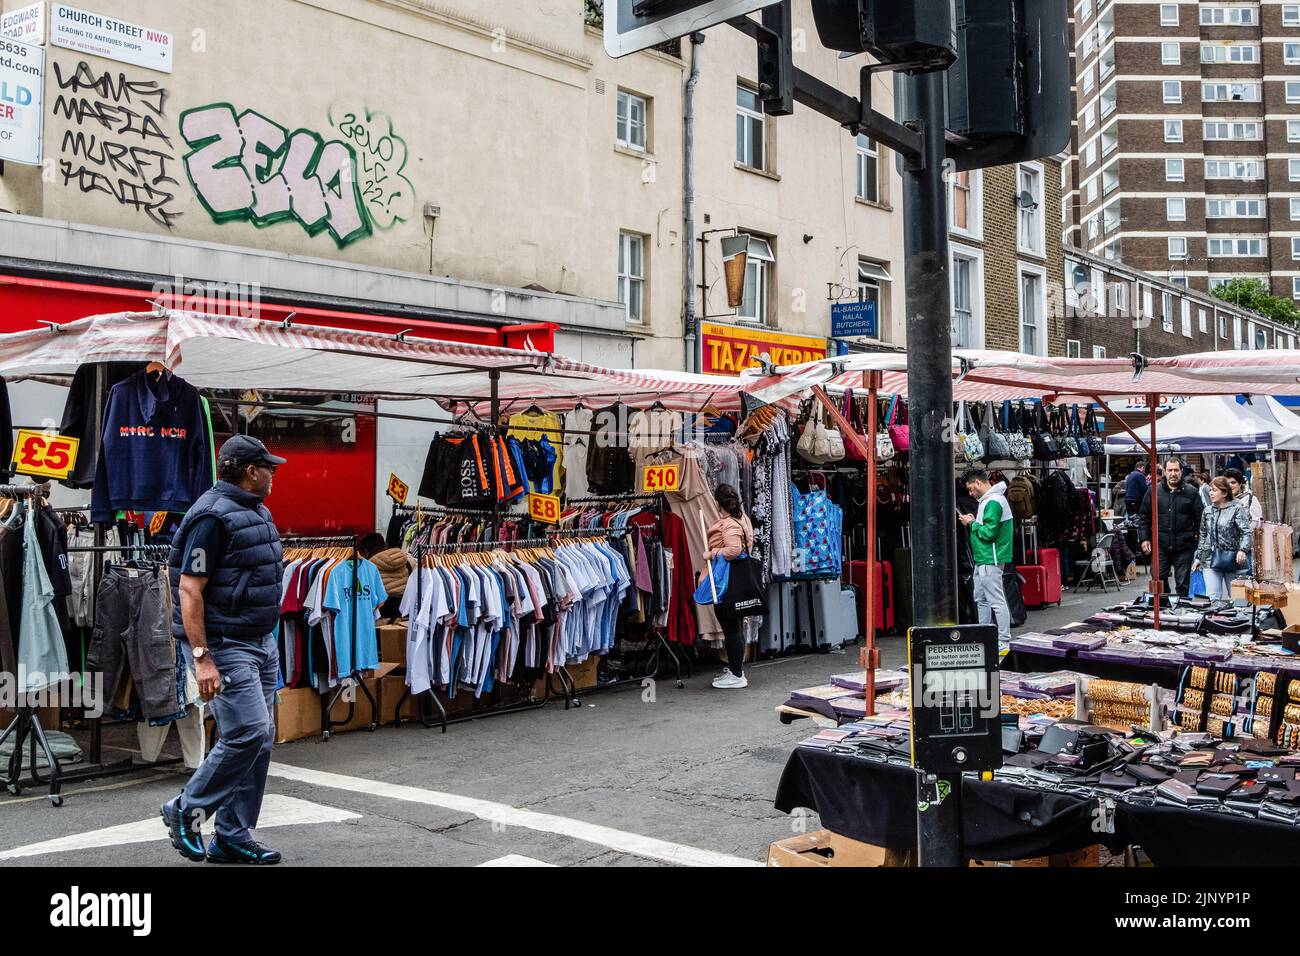 London, UK. 26th May, 2022. Members of the public pass through Church Street market. Church Street, situated in one of London's most multicultural are Stock Photo